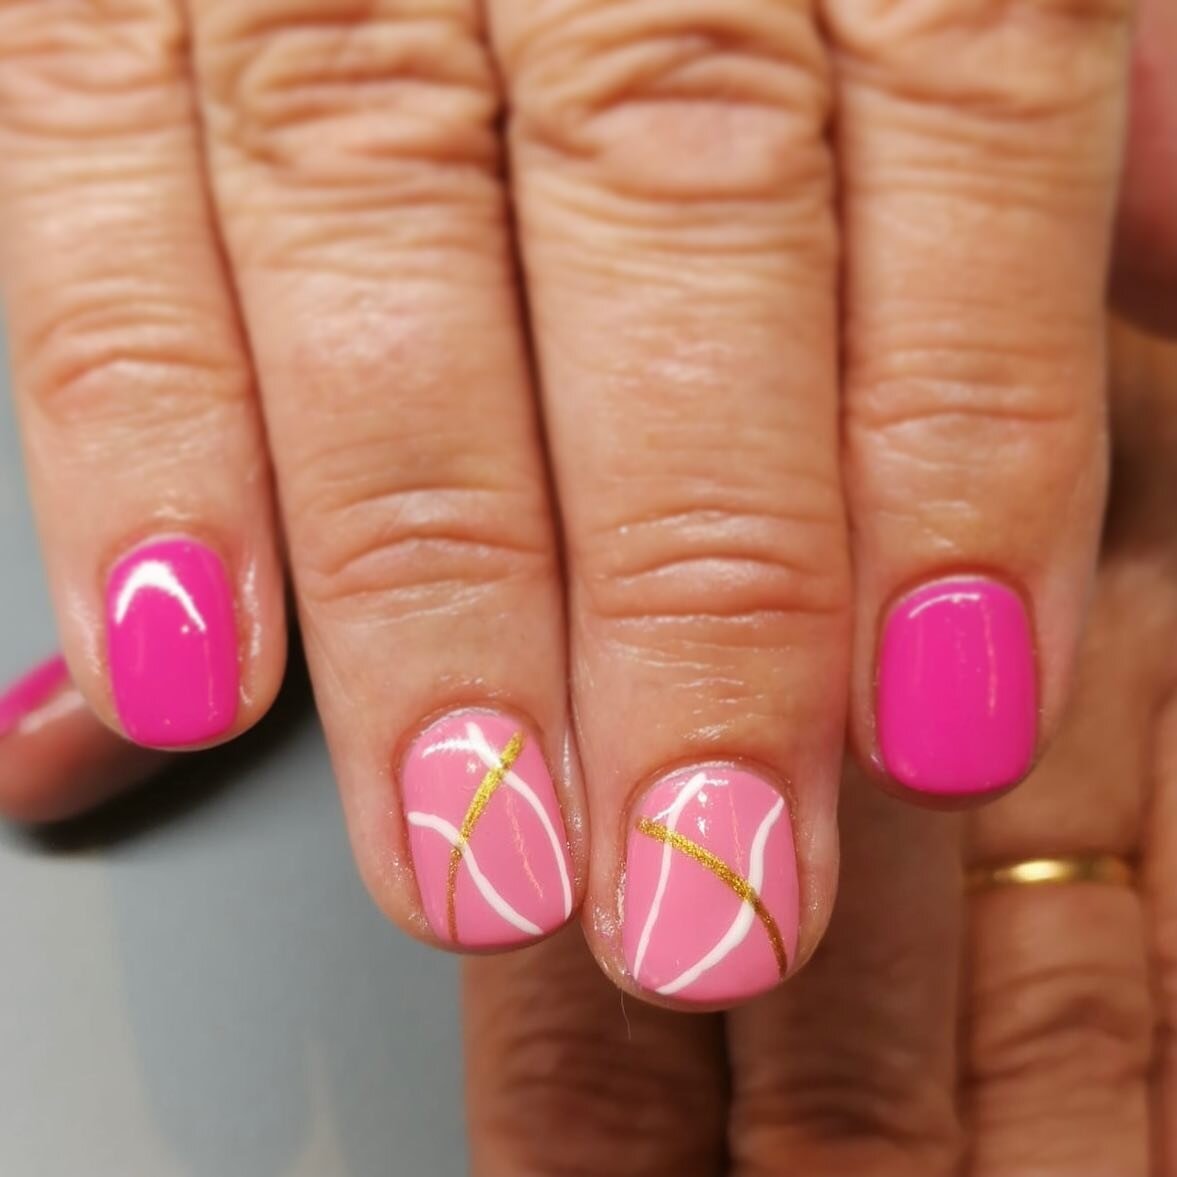 You are all loving the pinks this week 💗

Summer holiday vibes all round! 

🖌. Basic Nail Art by Rachael